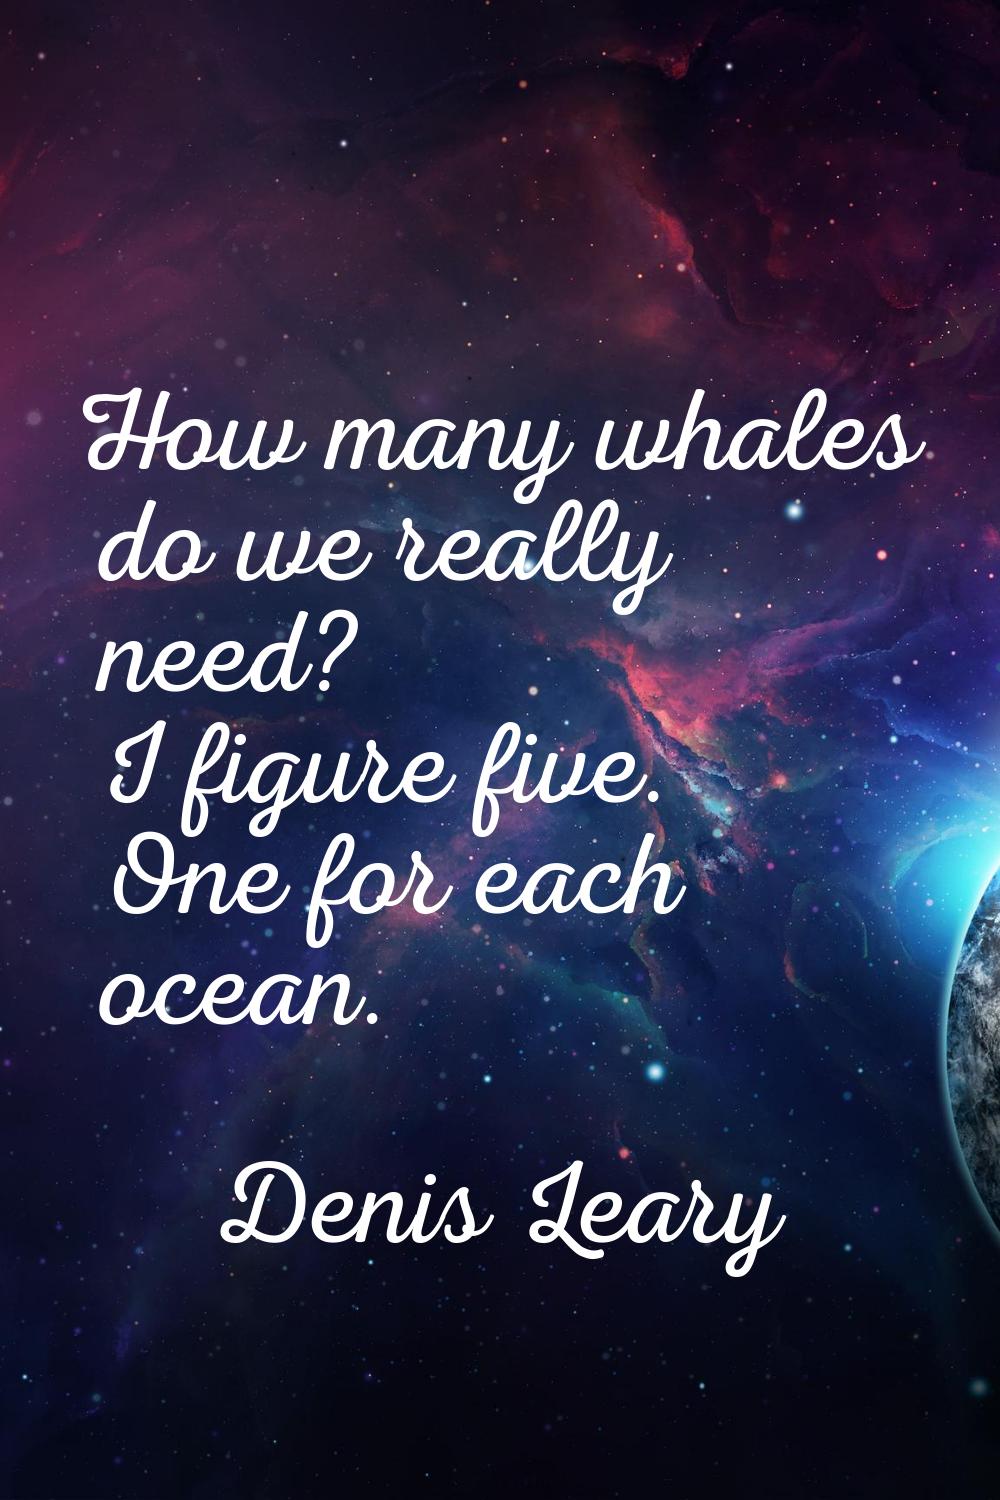 How many whales do we really need? I figure five. One for each ocean.